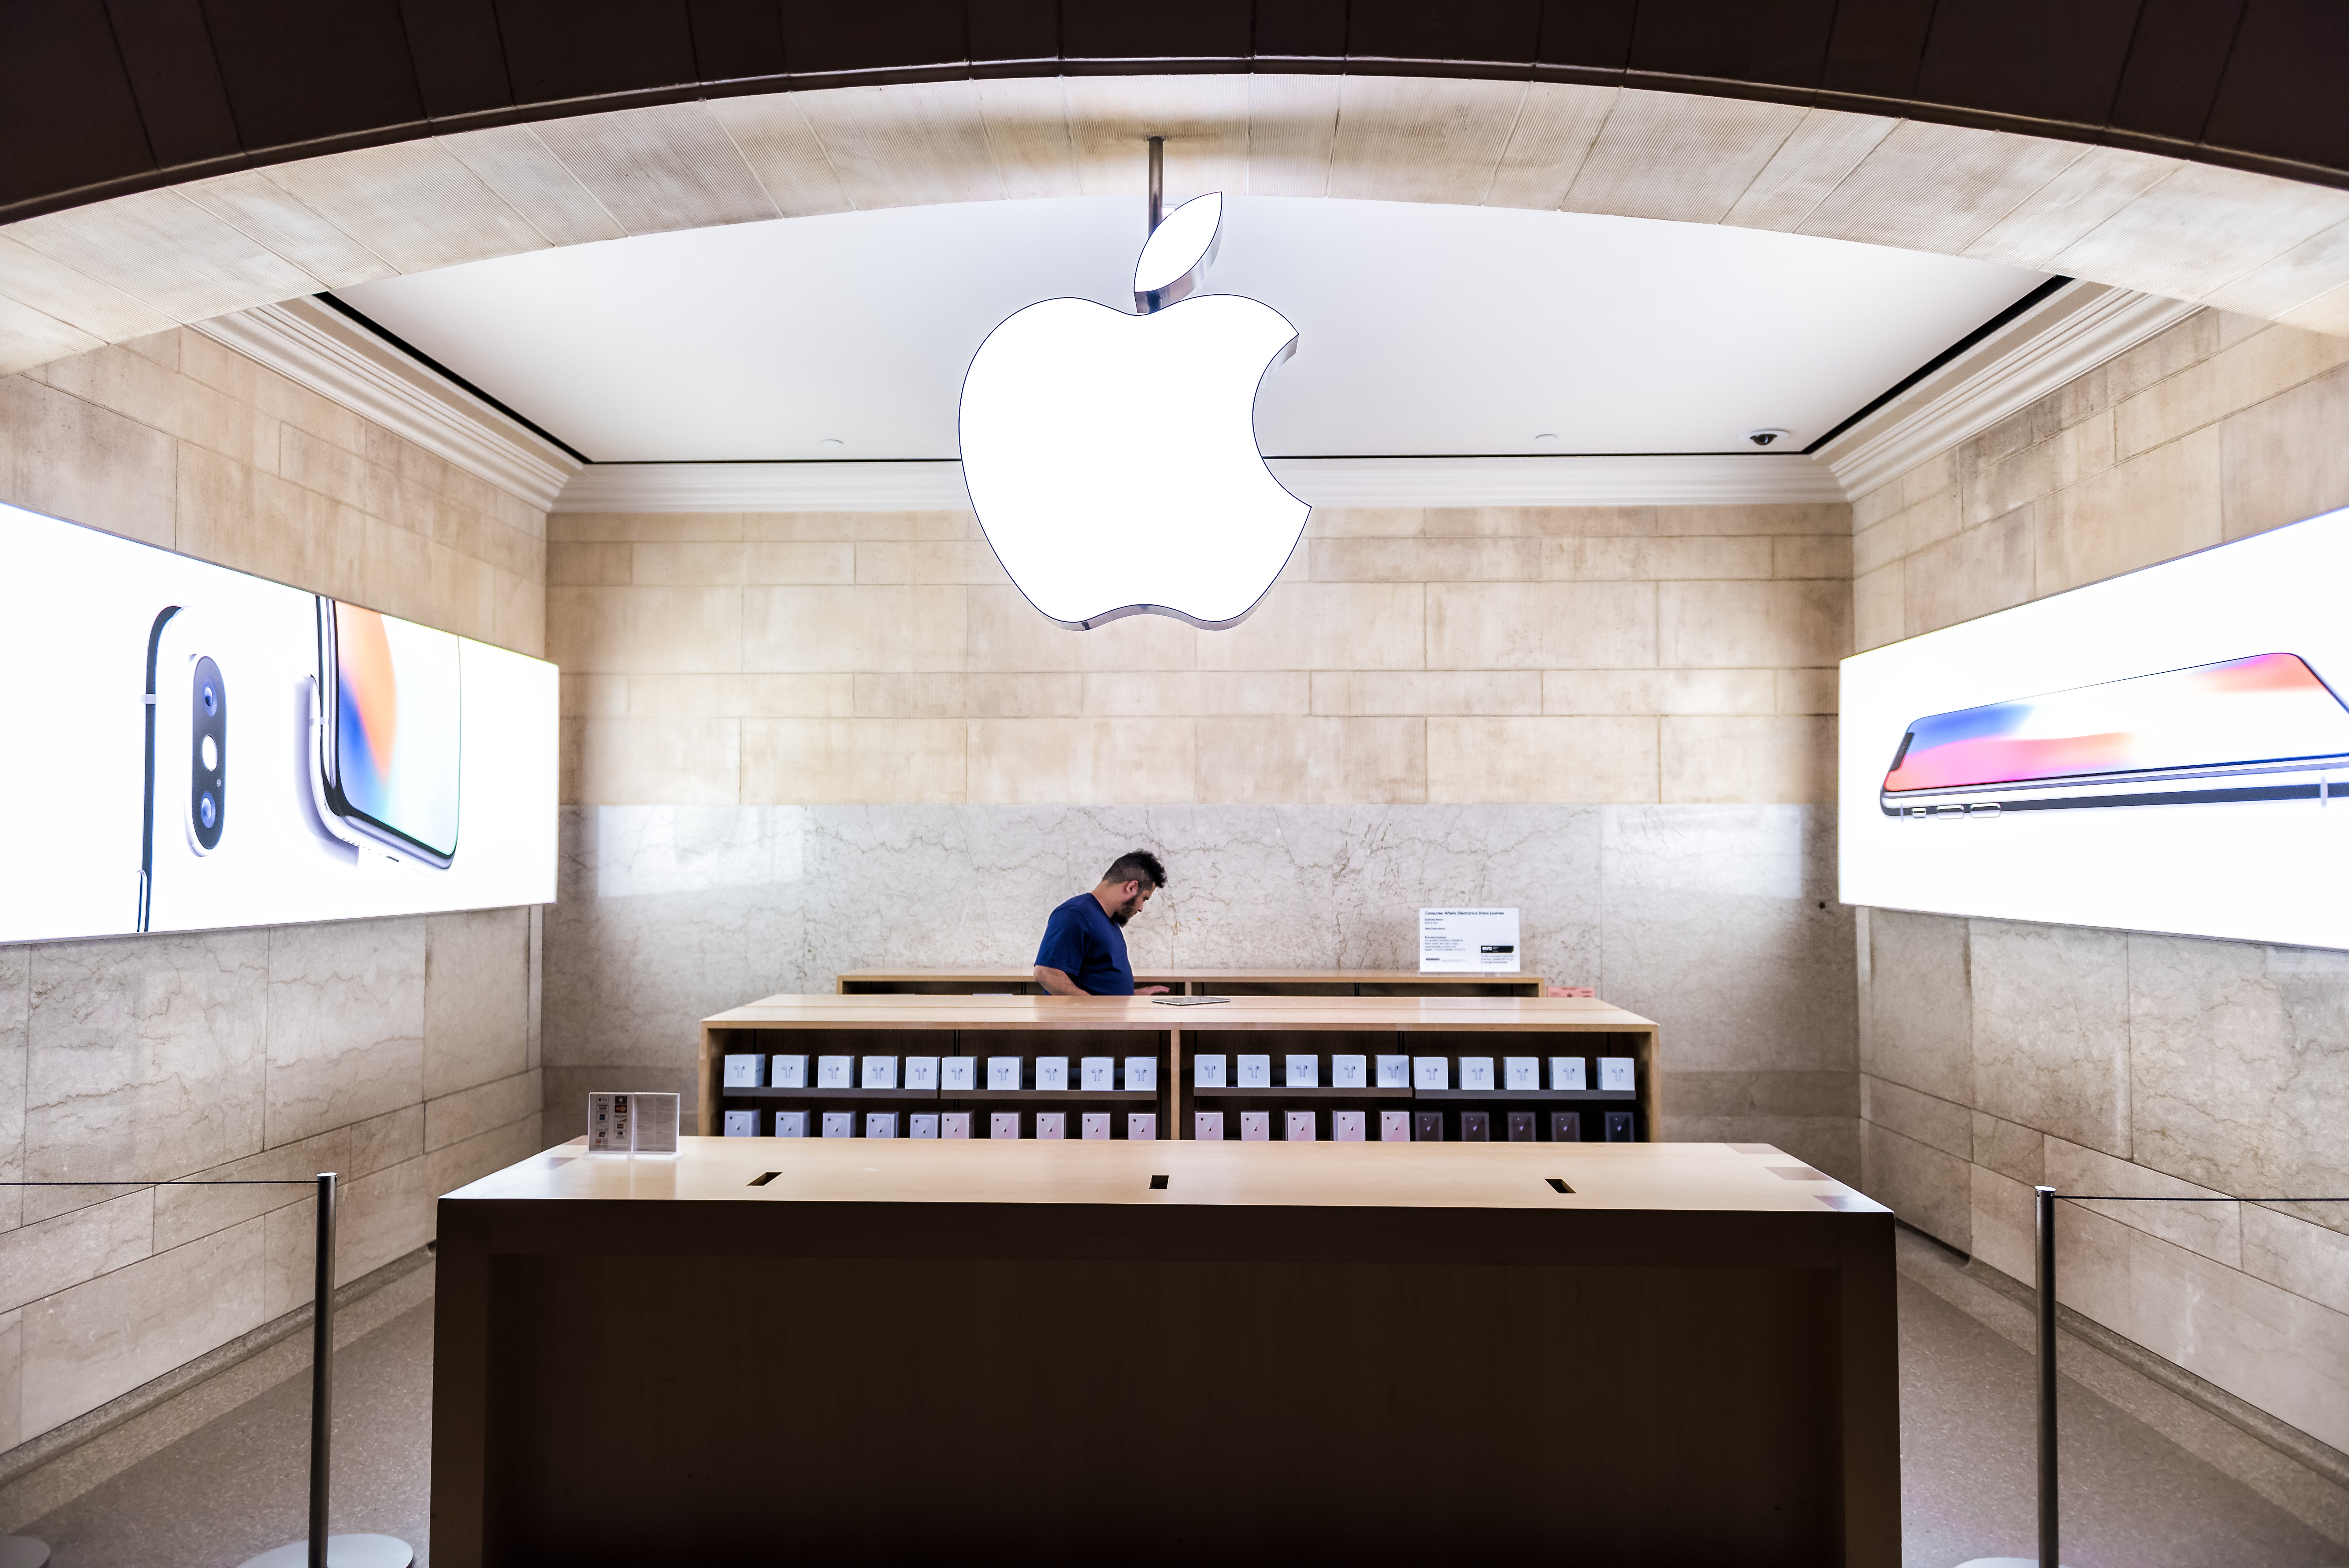 Apple Gives 10% Hike To Store Workers Amid Hot Inflation, Unionization Drive